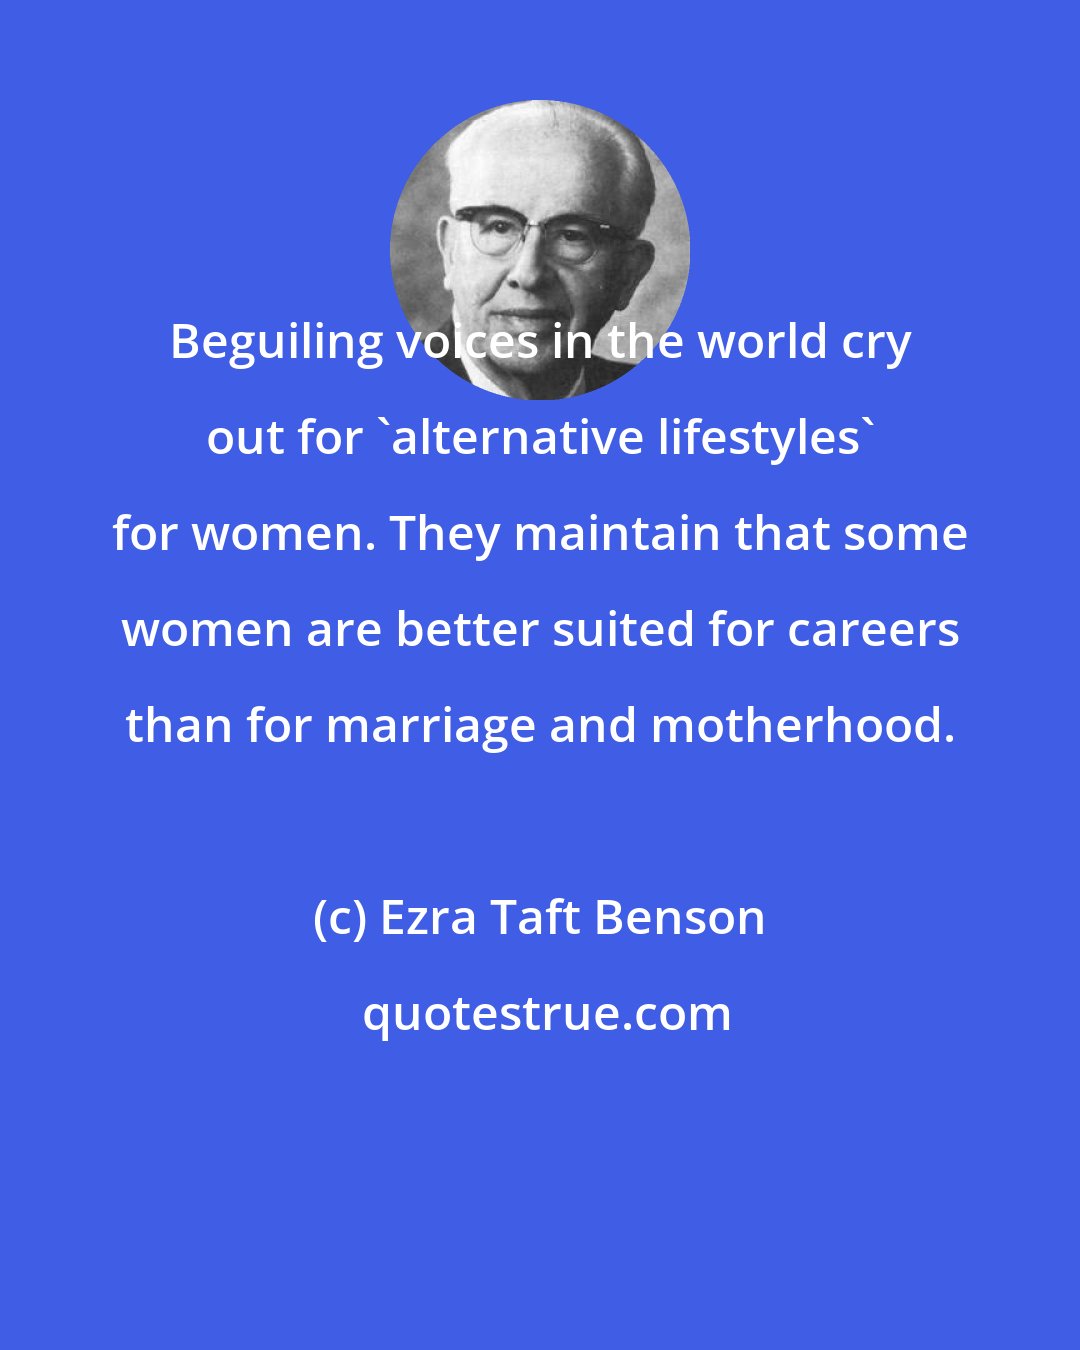 Ezra Taft Benson: Beguiling voices in the world cry out for 'alternative lifestyles' for women. They maintain that some women are better suited for careers than for marriage and motherhood.